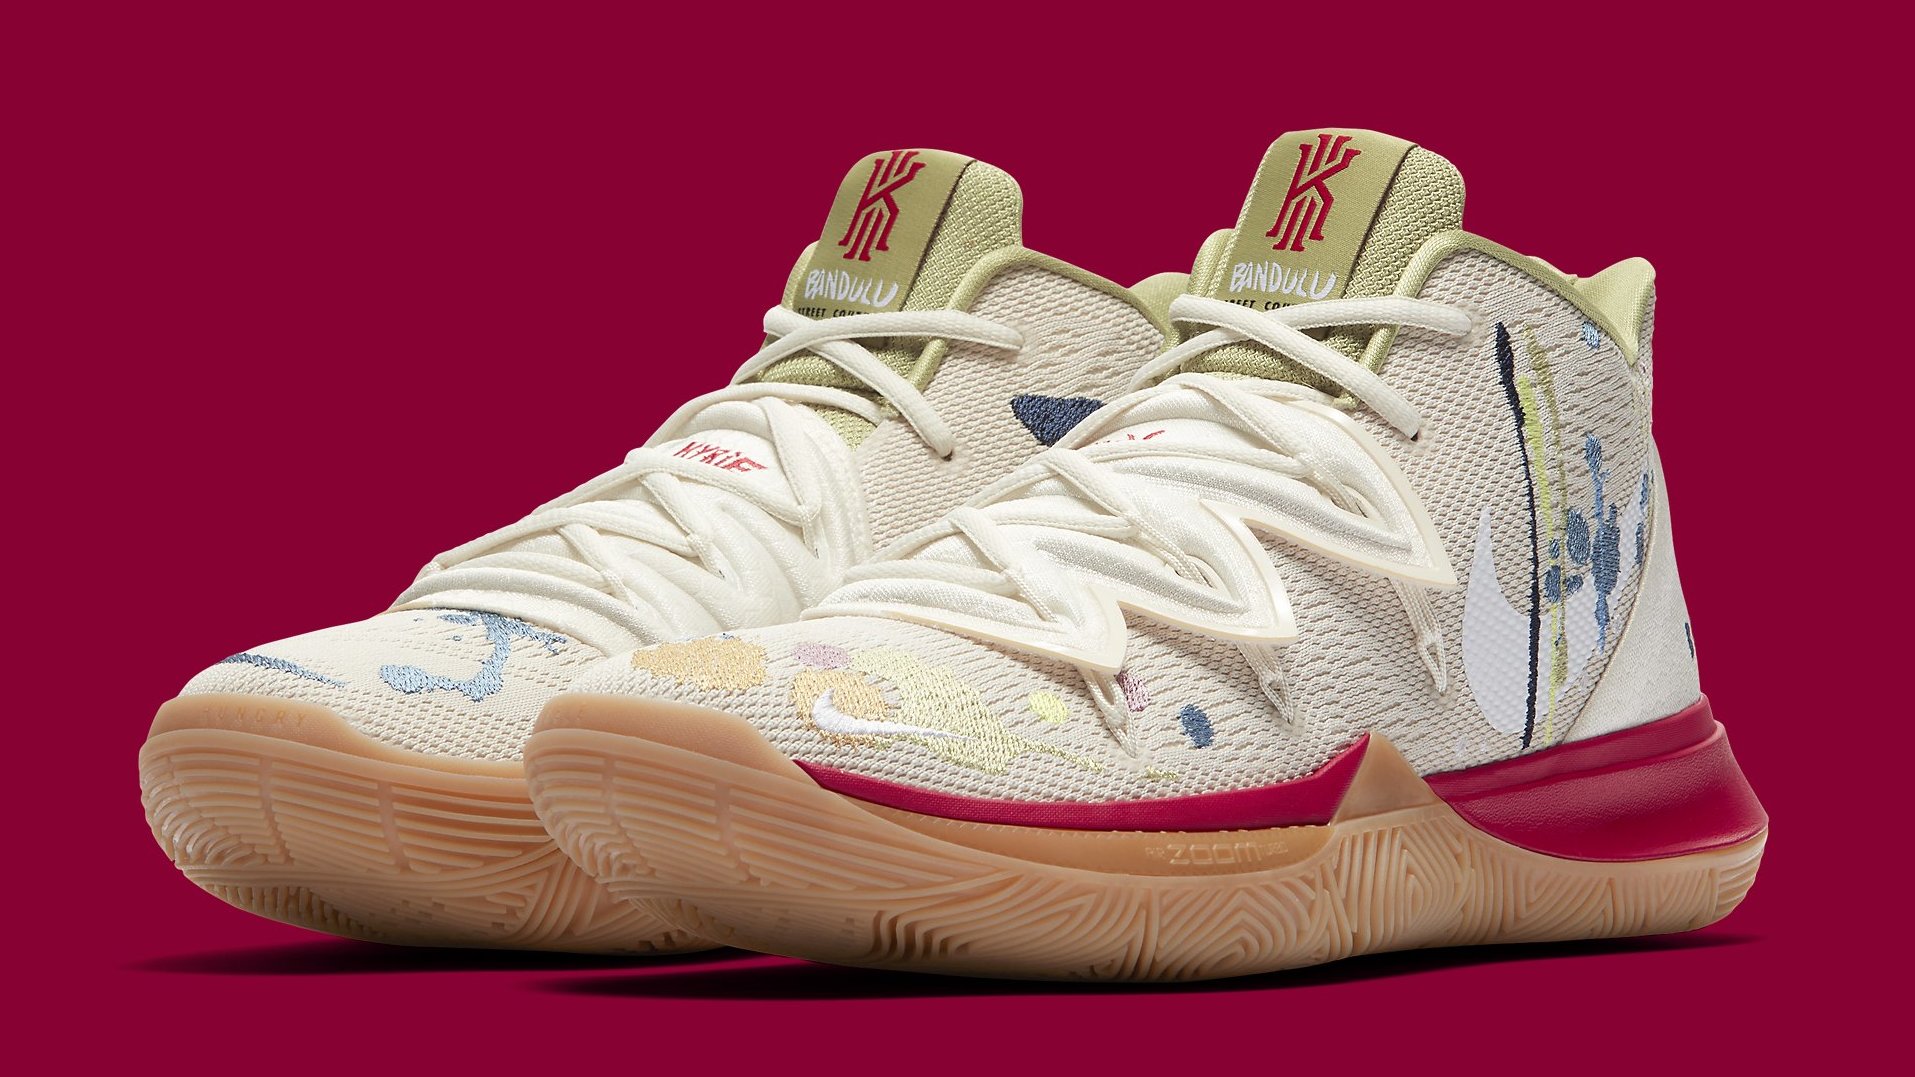 Here's An Official Look at the Bandulu x Kyrie 5 | Complex